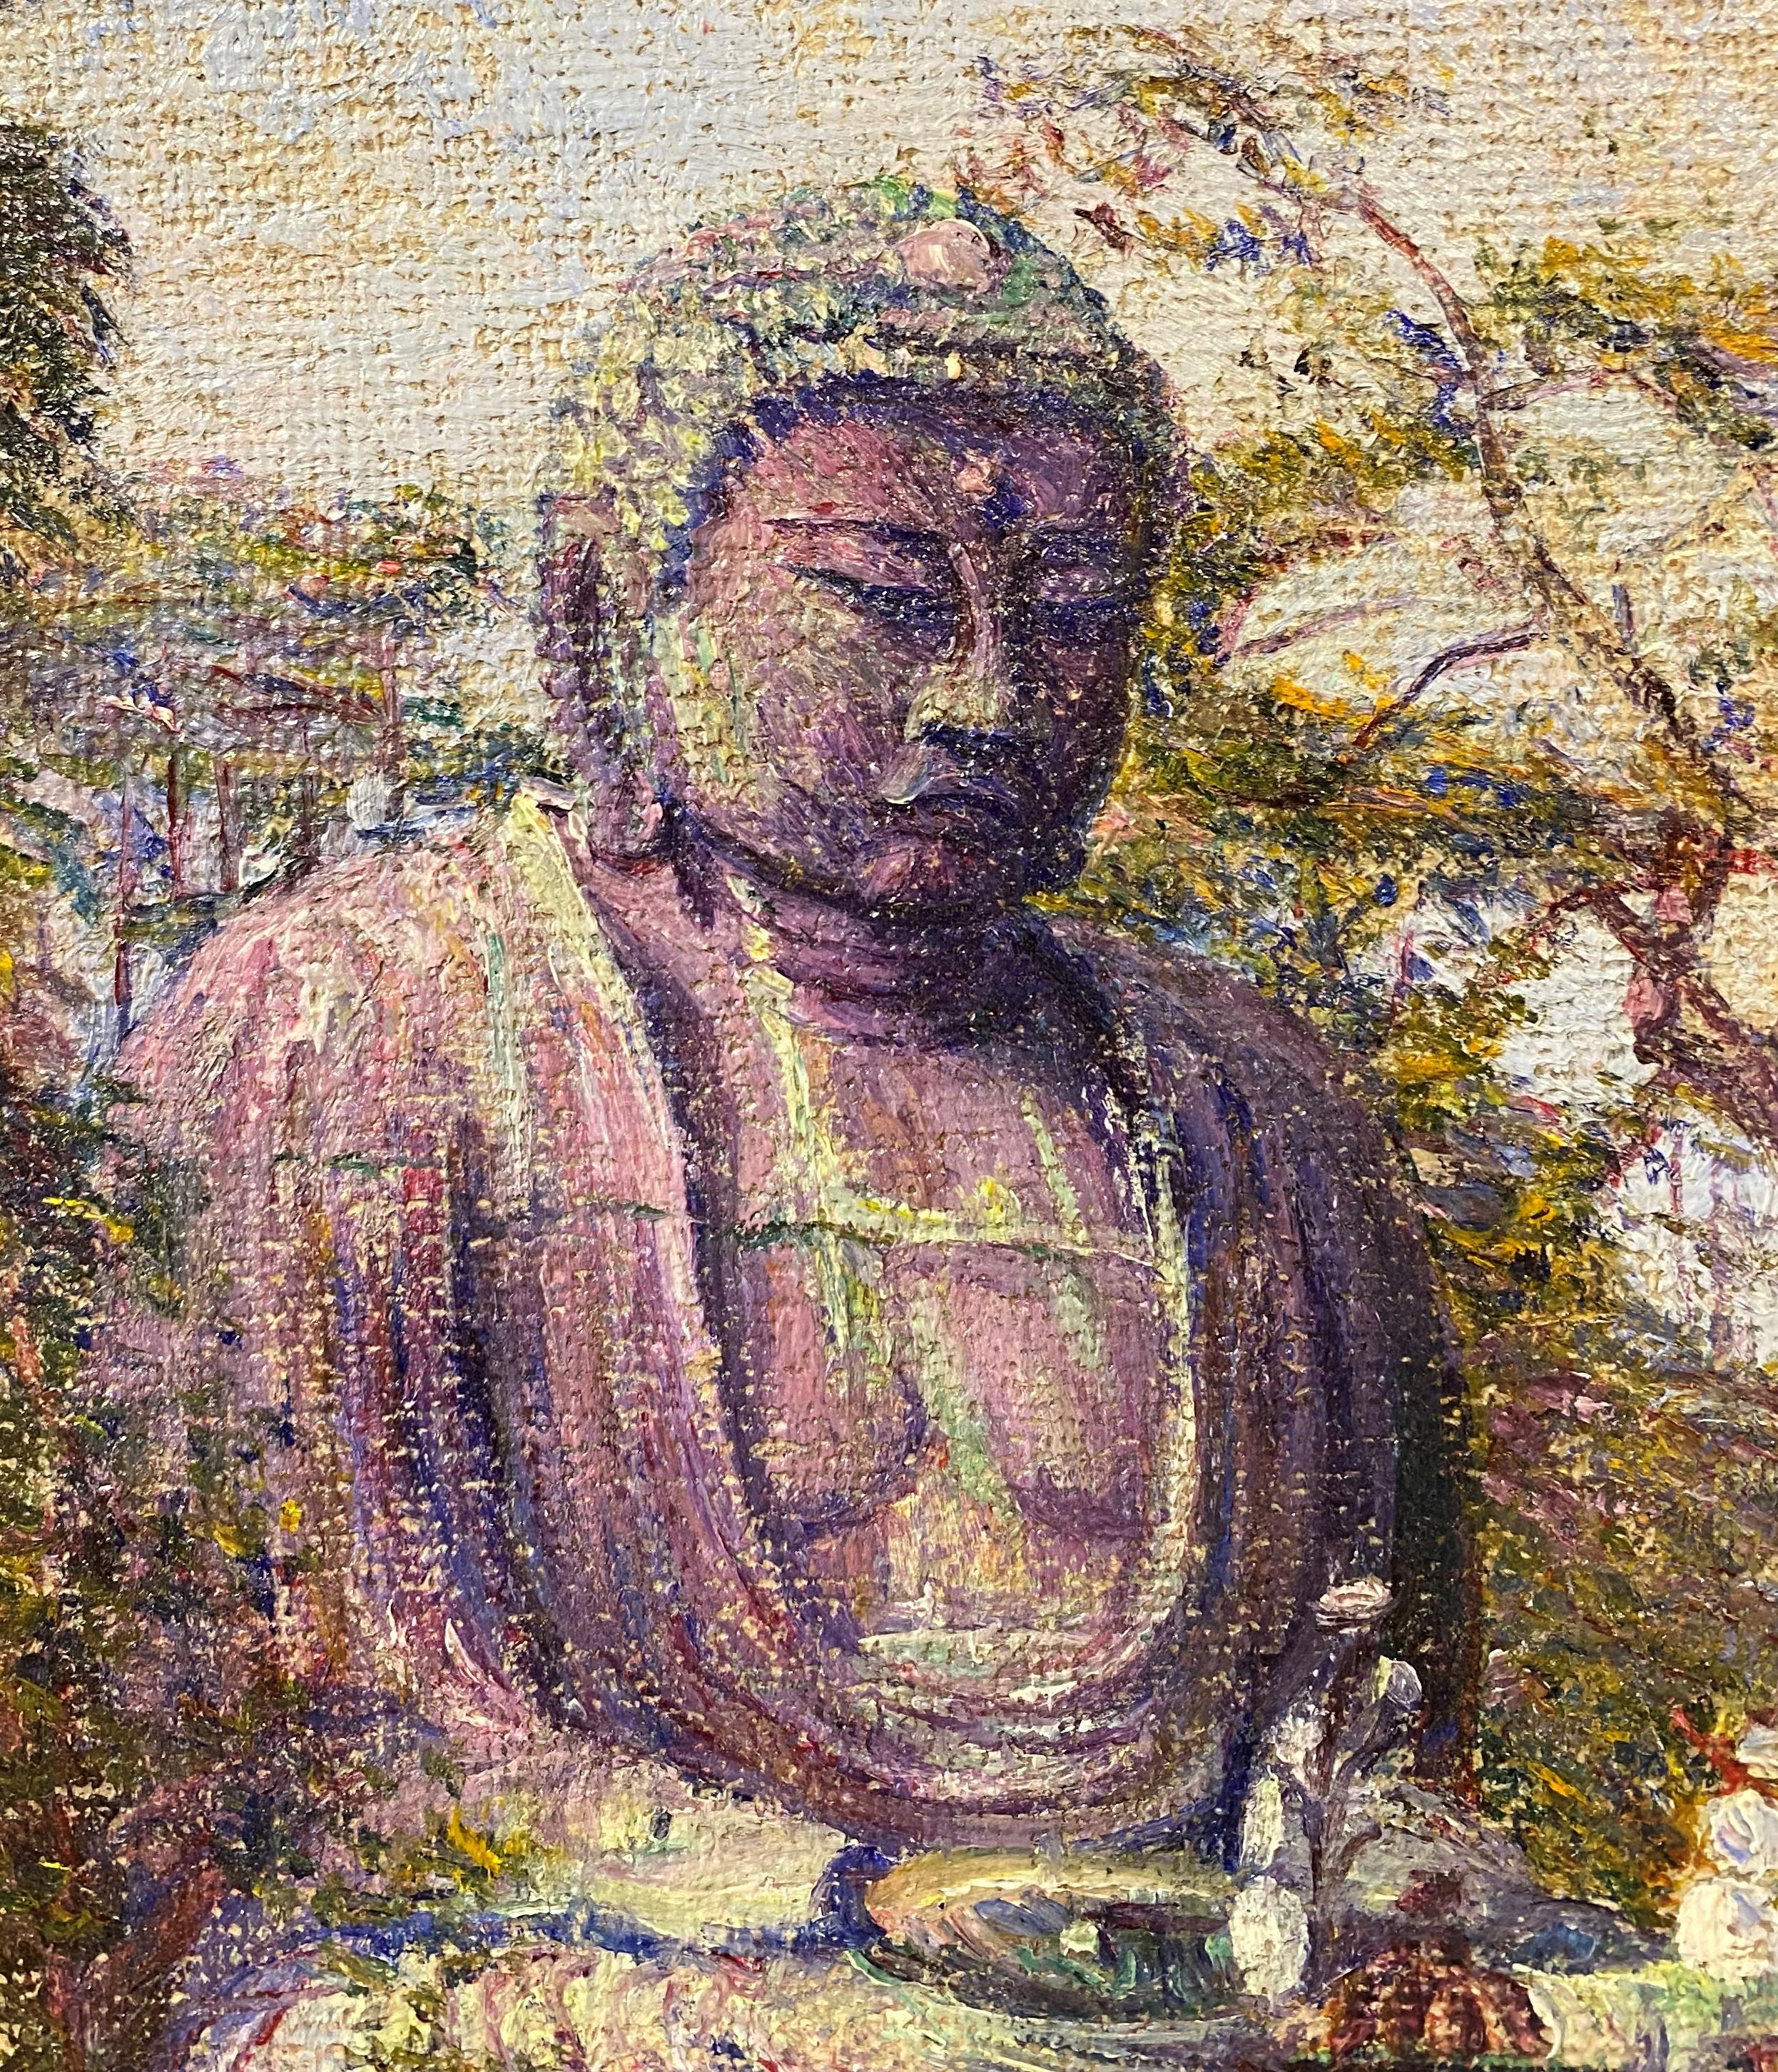 A fine small oil study of a Buddha in Japan by American artist Lilla Cabot Perry (1848-1933). Perry was born in Boston, Massachusetts, and went on to become a founder and first Secretary of the Guild of Boston Artists. She had the opportunity to